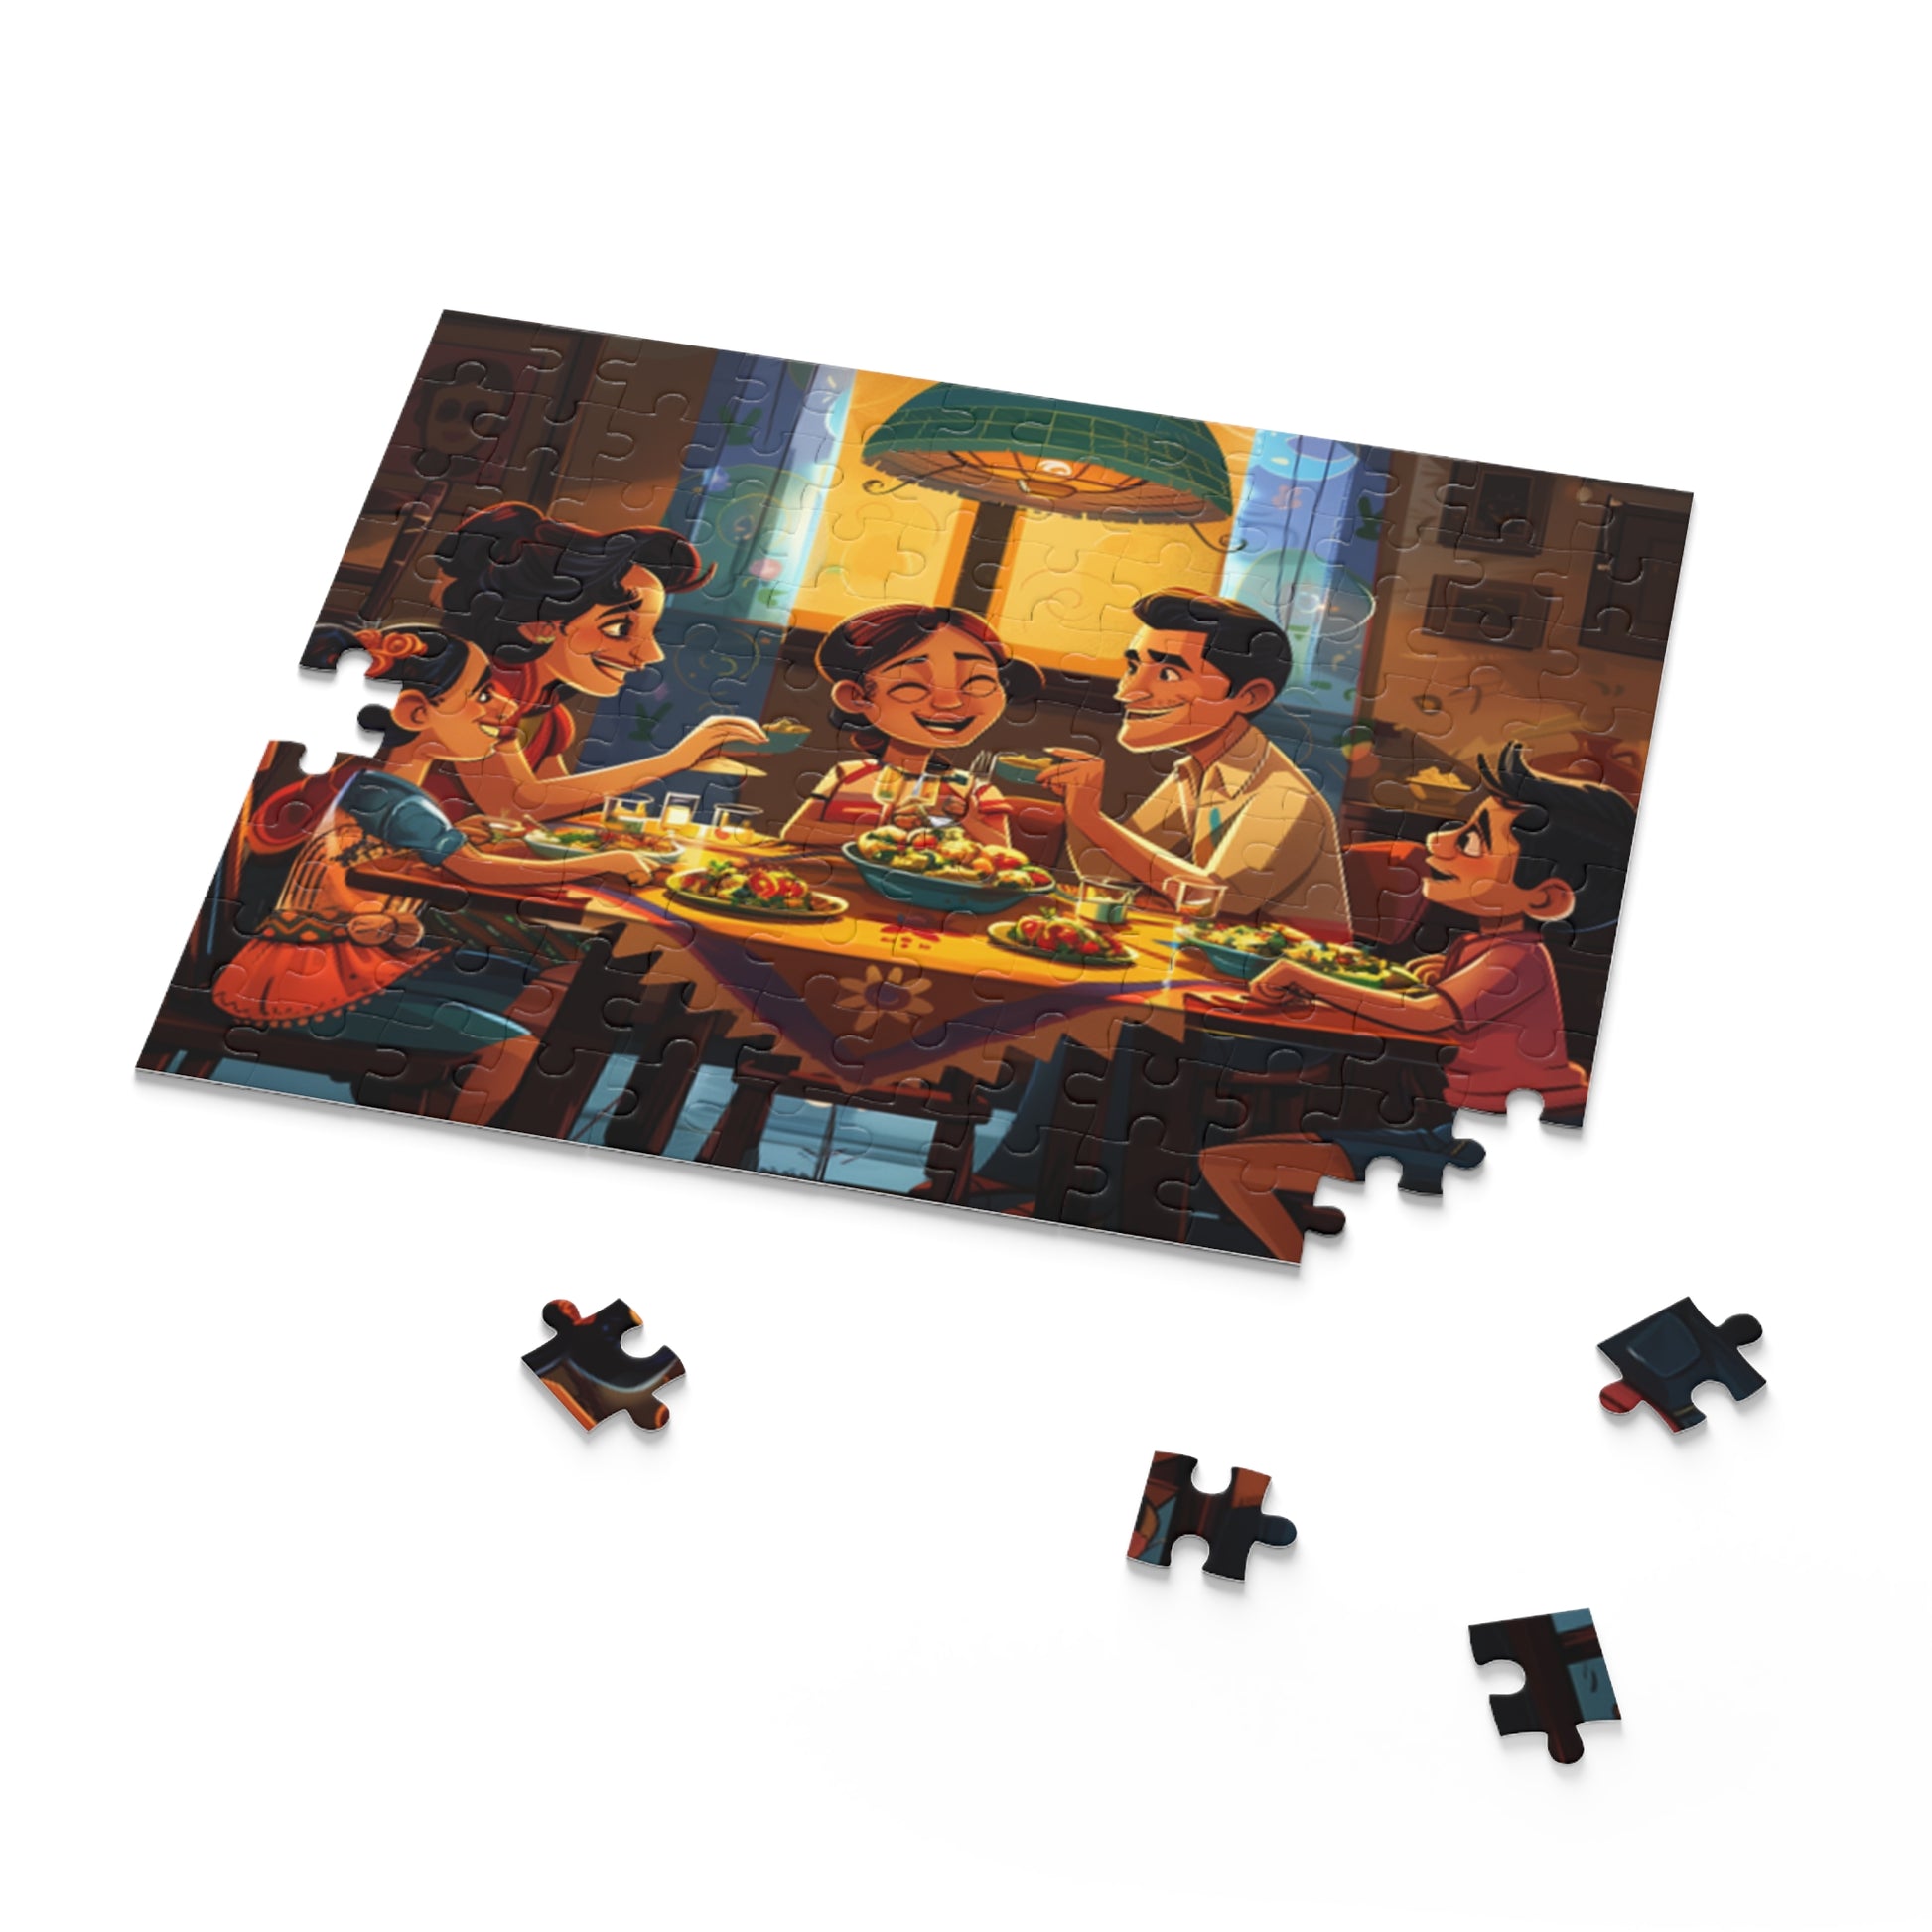 Mexican Art Happy Family Retro Jigsaw Puzzle Adult Birthday Business Jigsaw Puzzle Gift for Him Funny Humorous Indoor Outdoor Game Gift For Her Online-7